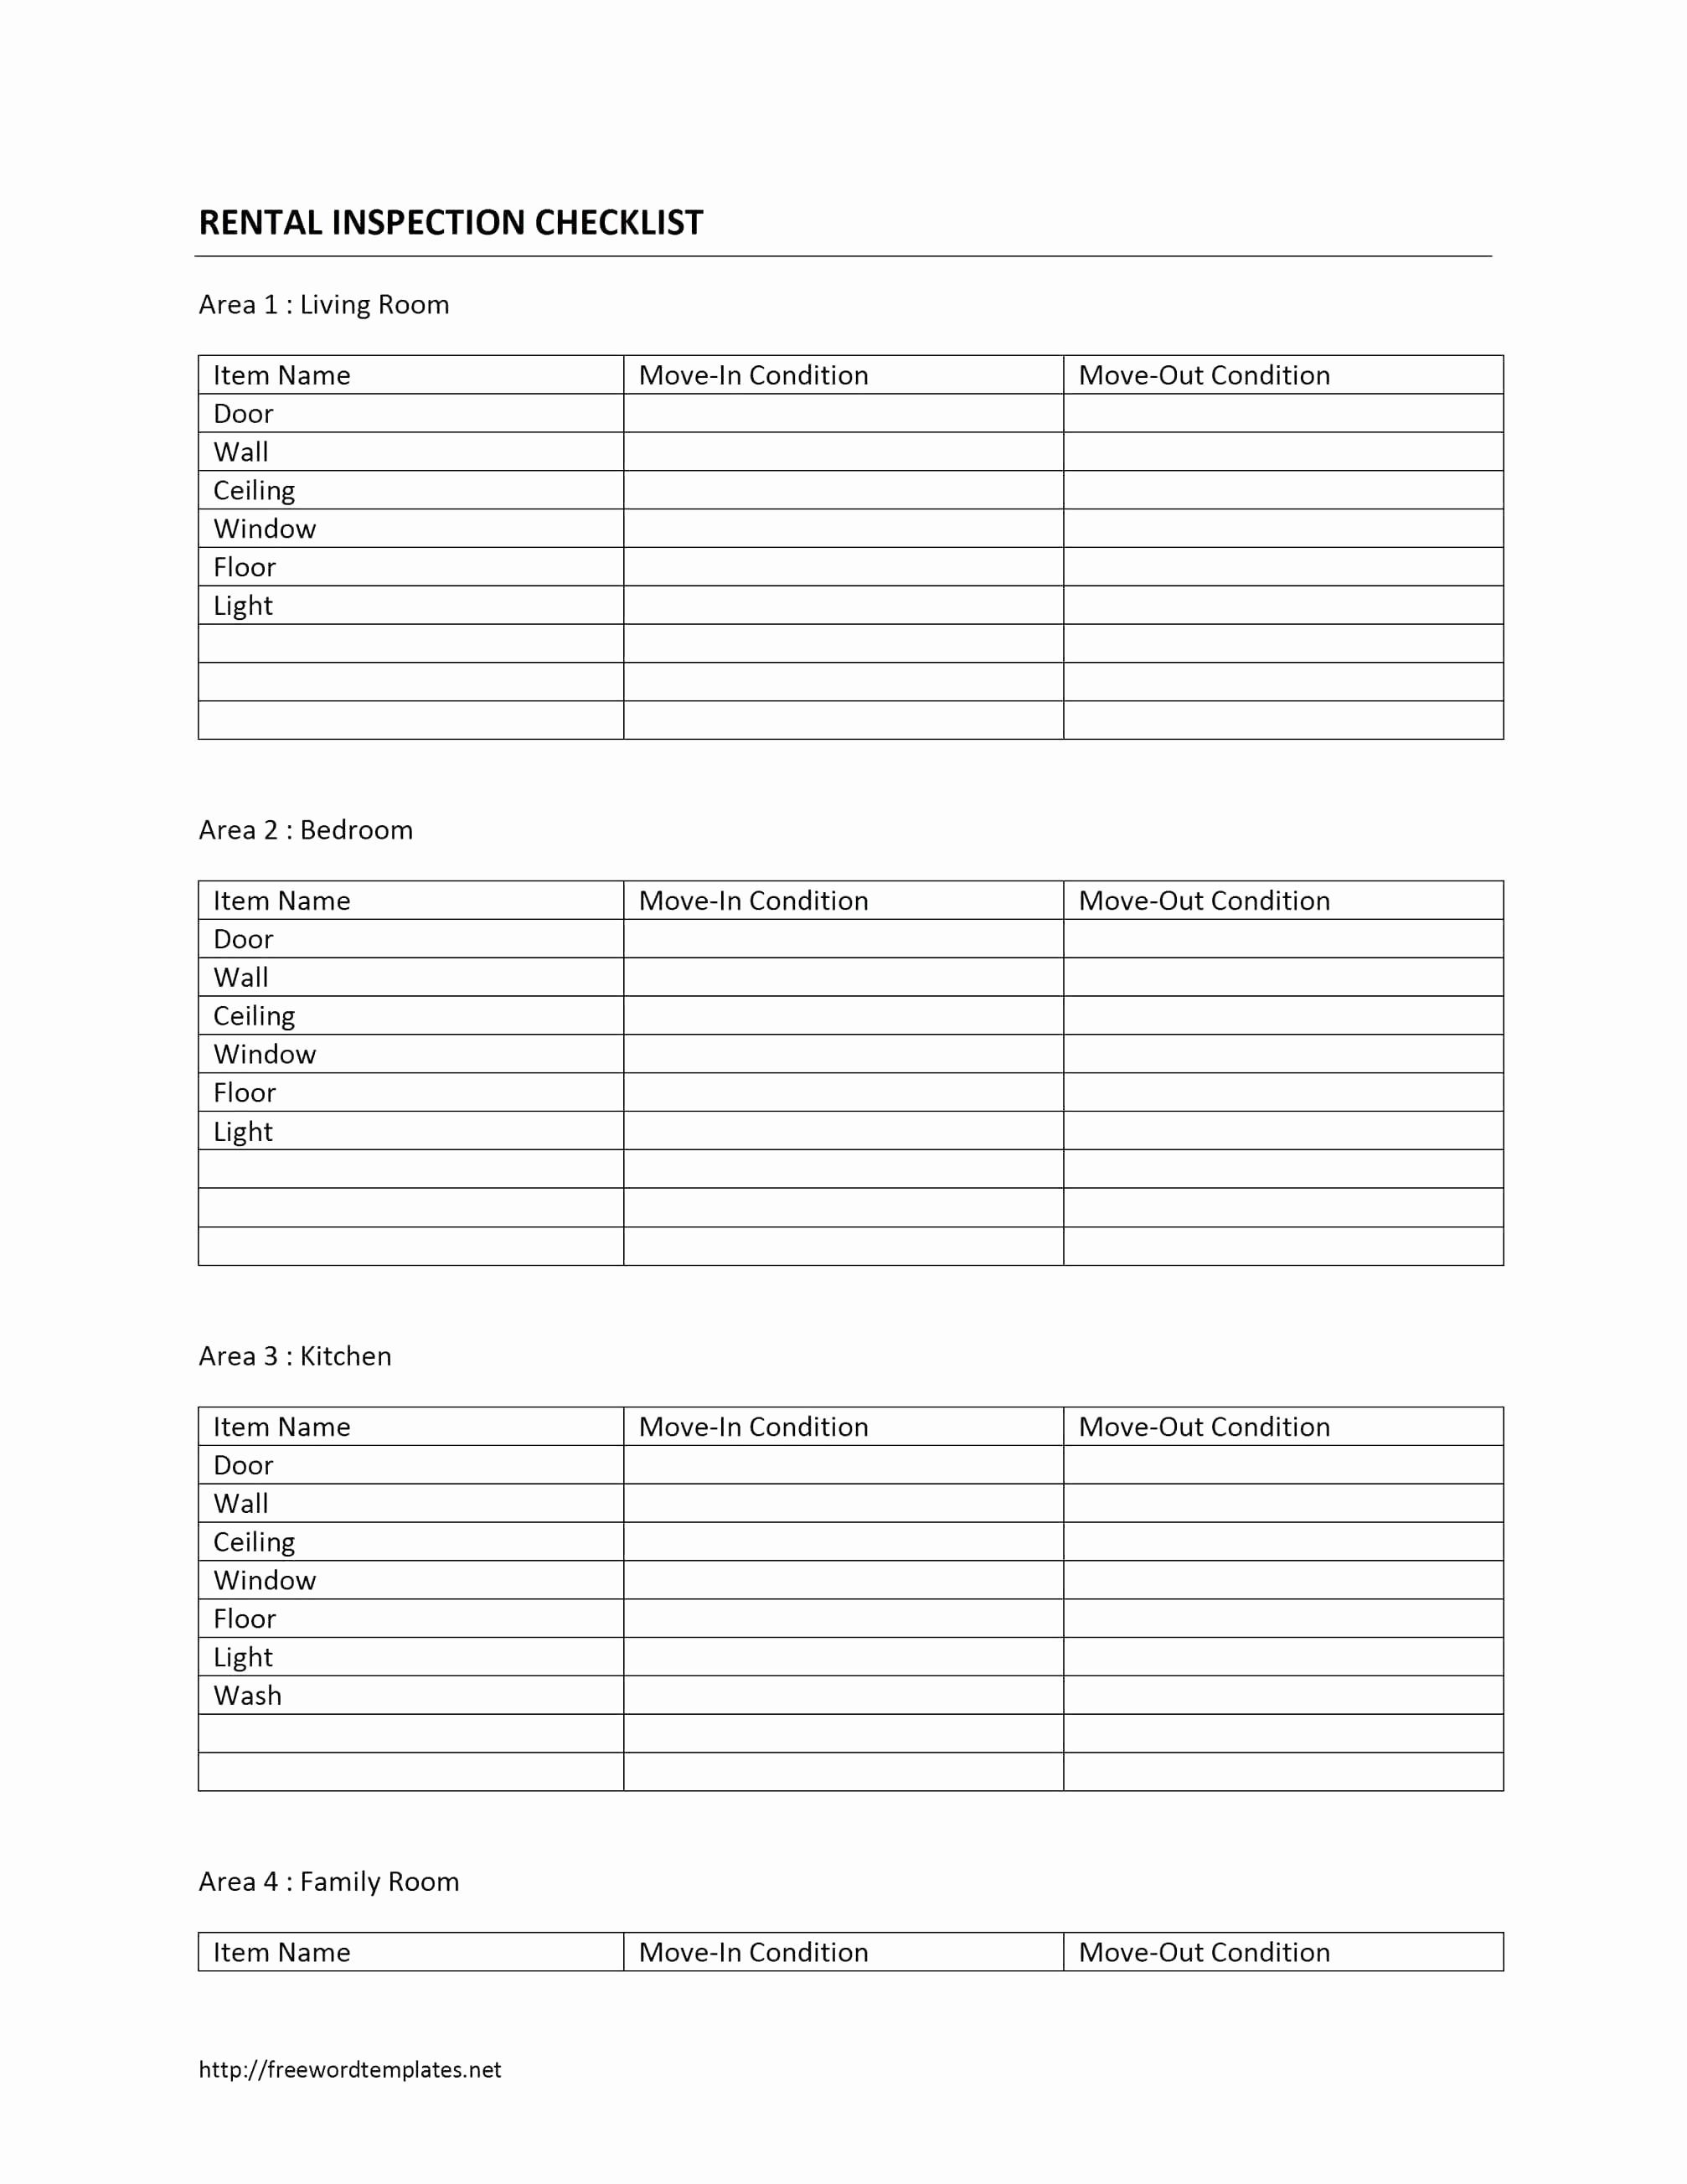 Single Family Dwelling Electrical Load Calculation Worksheet